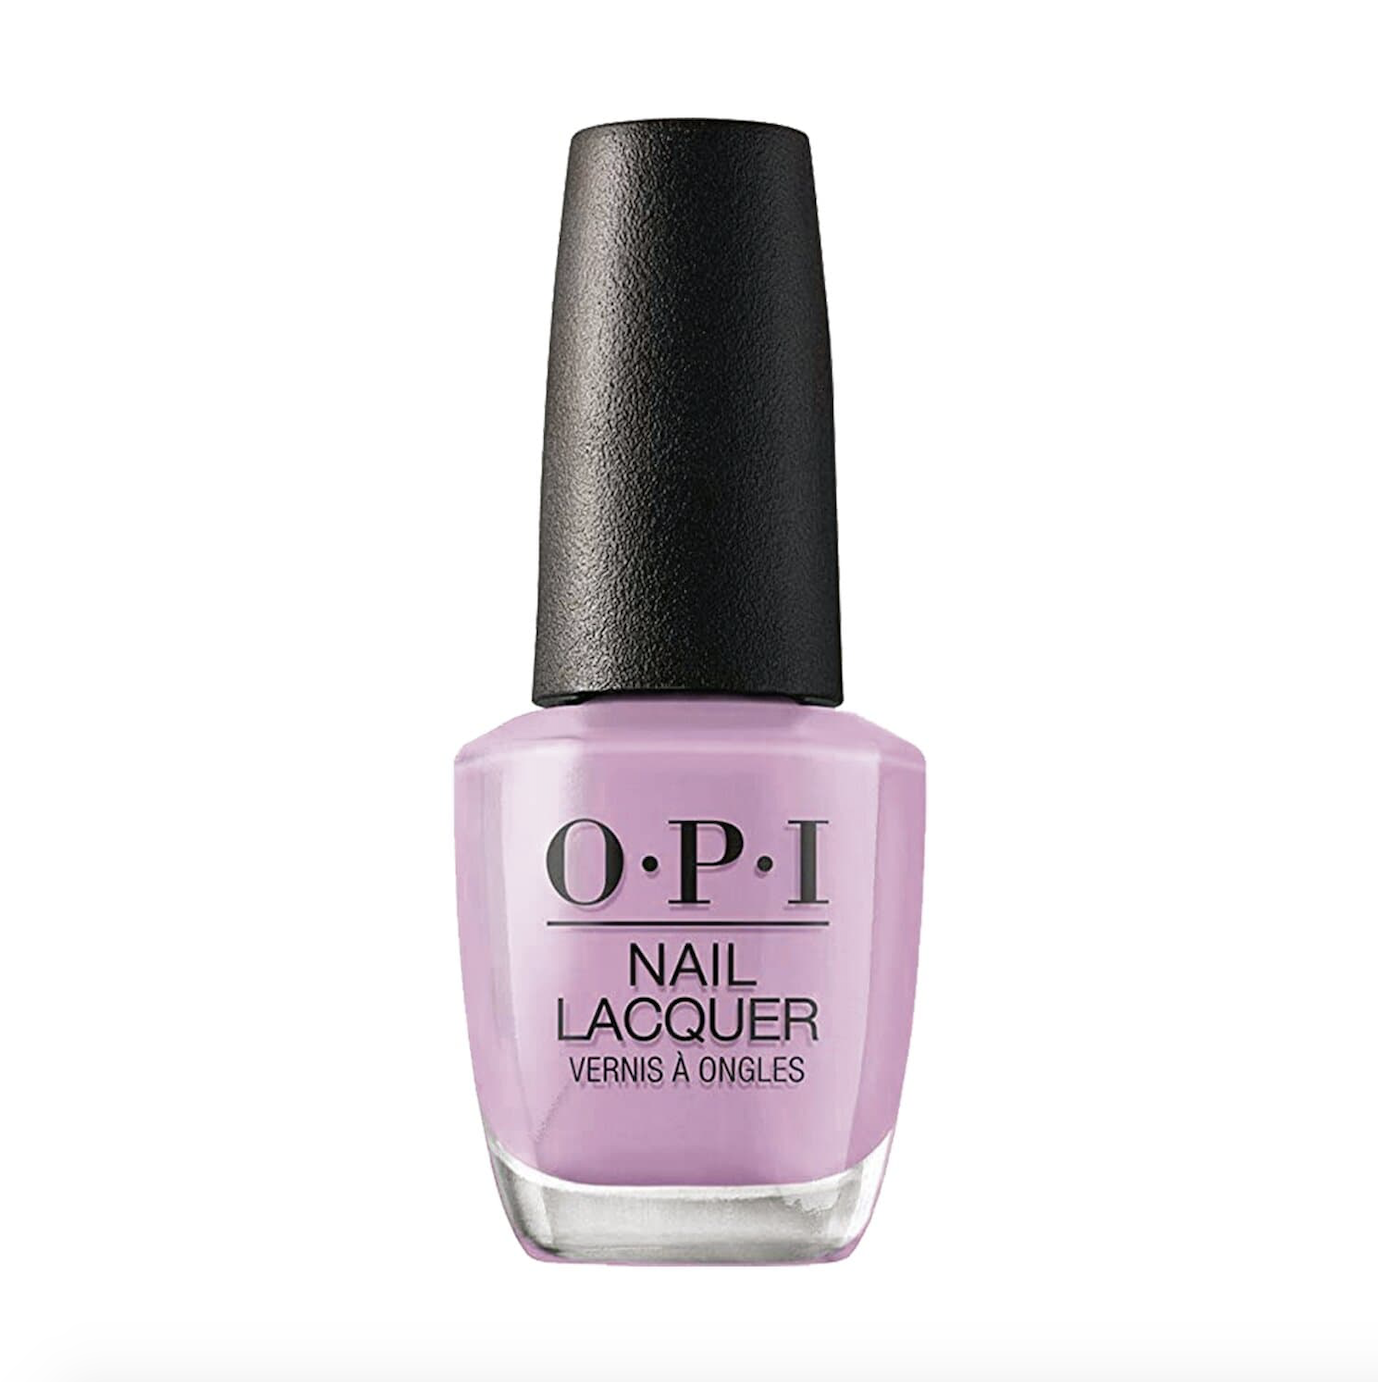 OPI Nail Lacquer - Lavendare to Find Courage